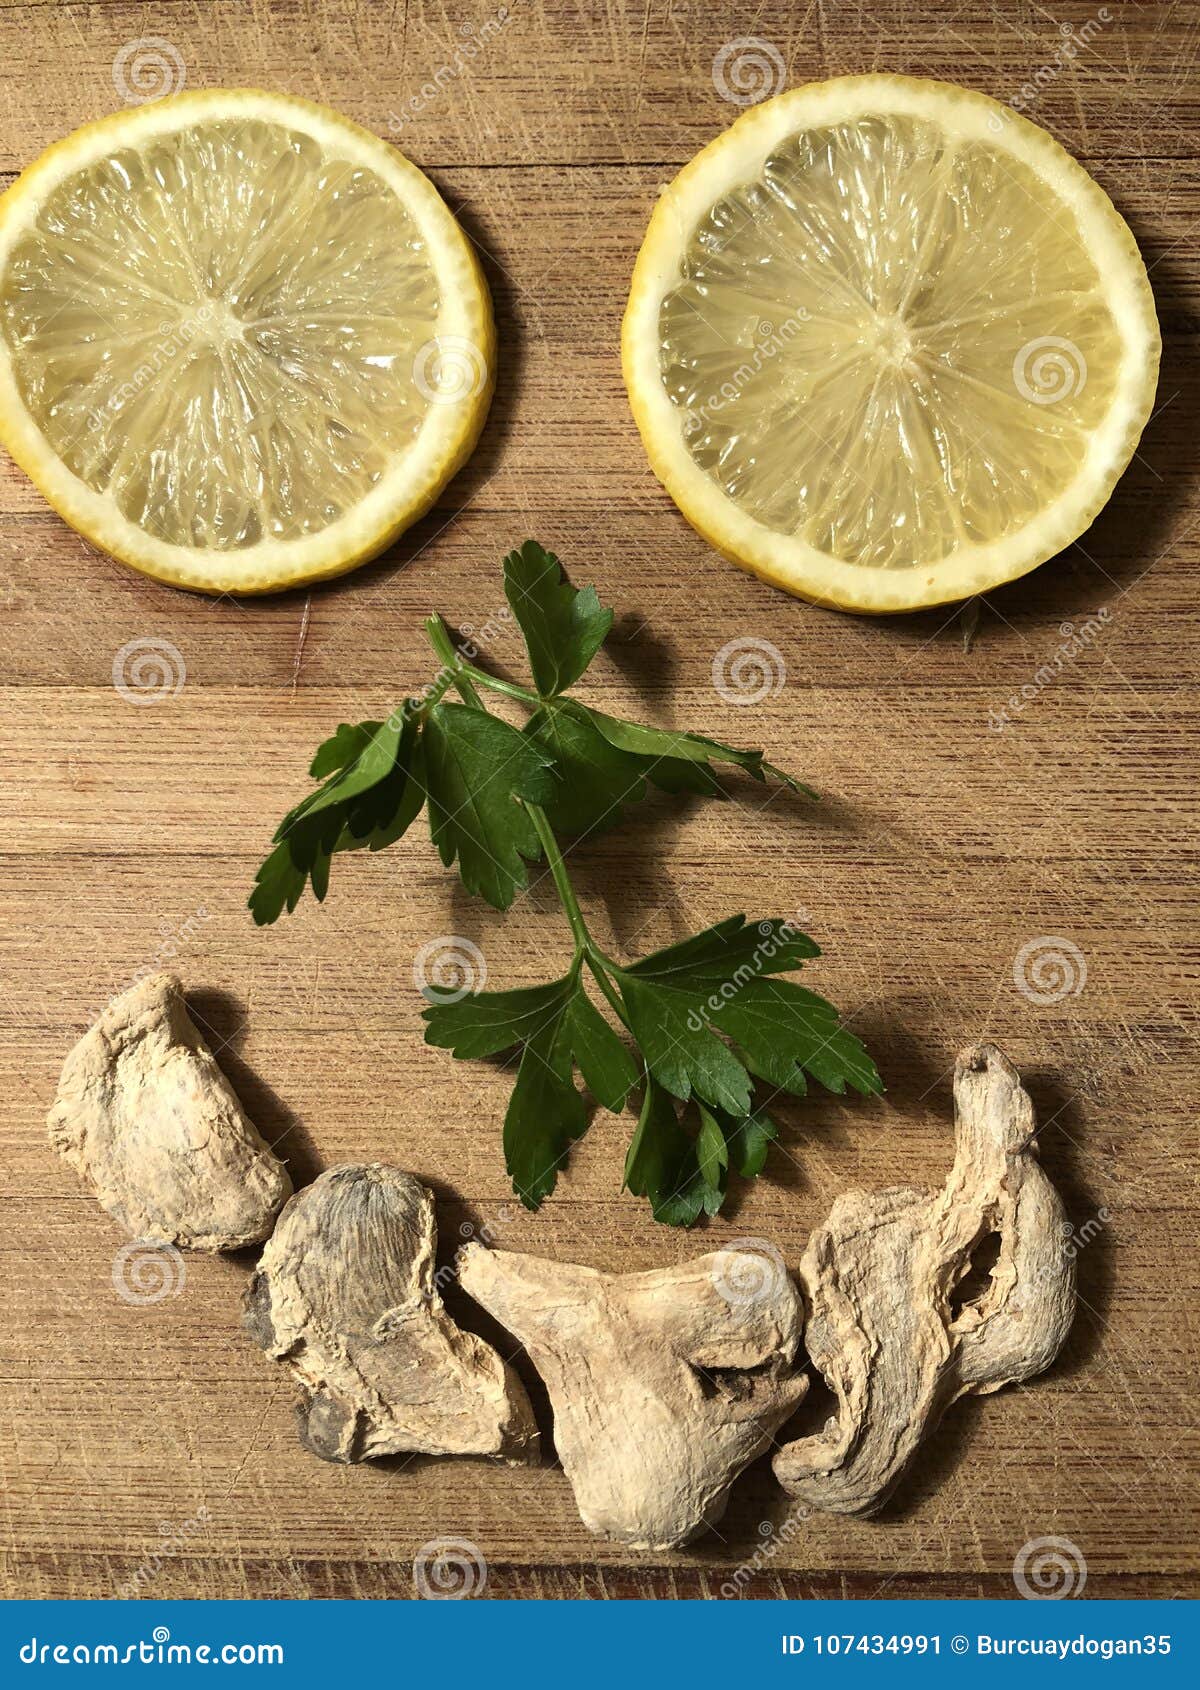 smiling face made from lemon slices, parsley and dried ginger